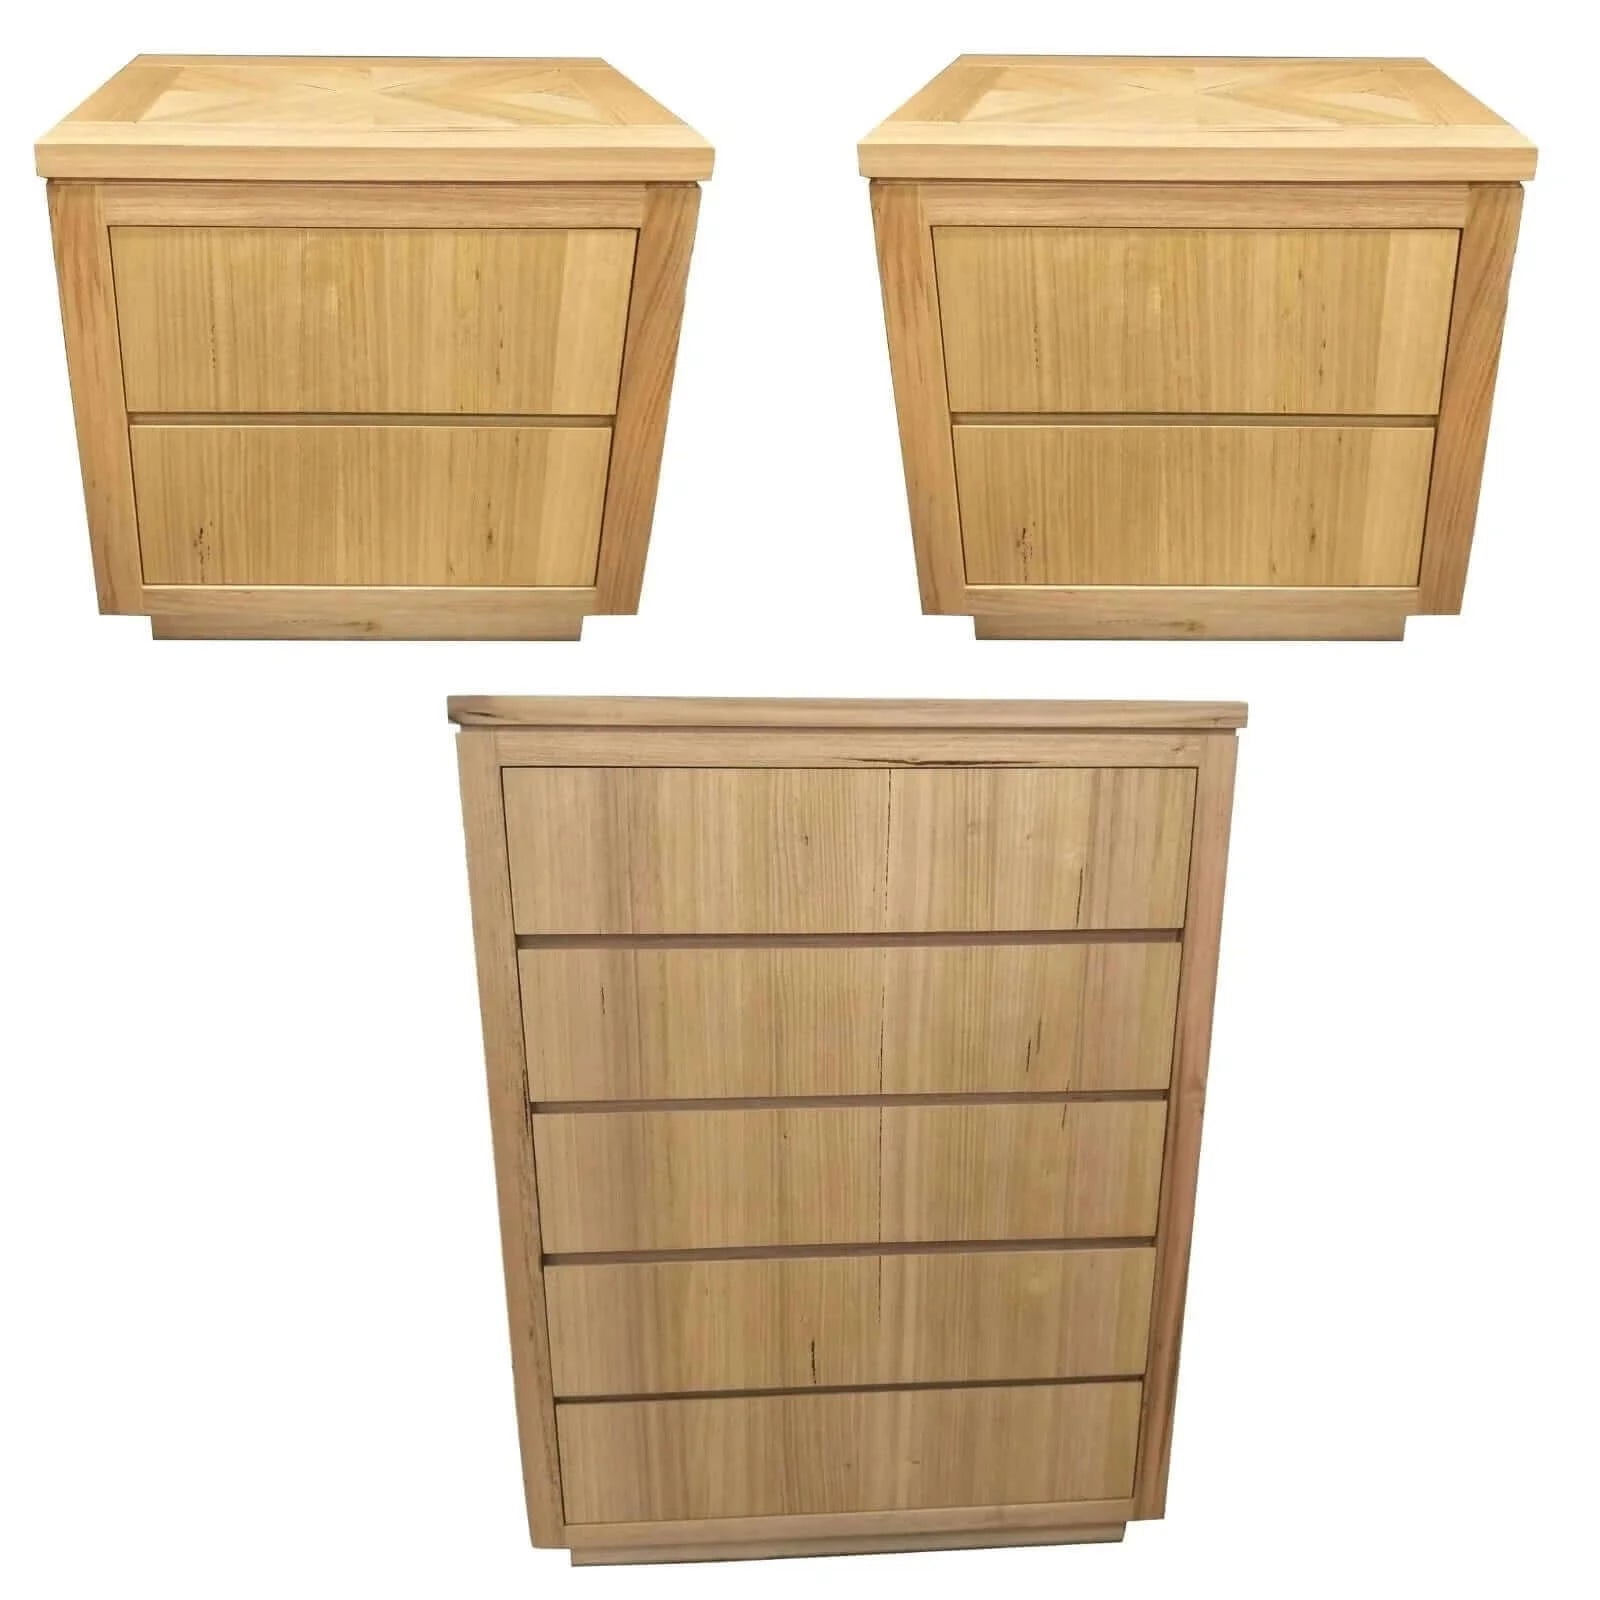 Buy rosemallow 2pc bedside 1 tallboy bedroom package chest of drawers set cabinet - upinteriors-Upinteriors